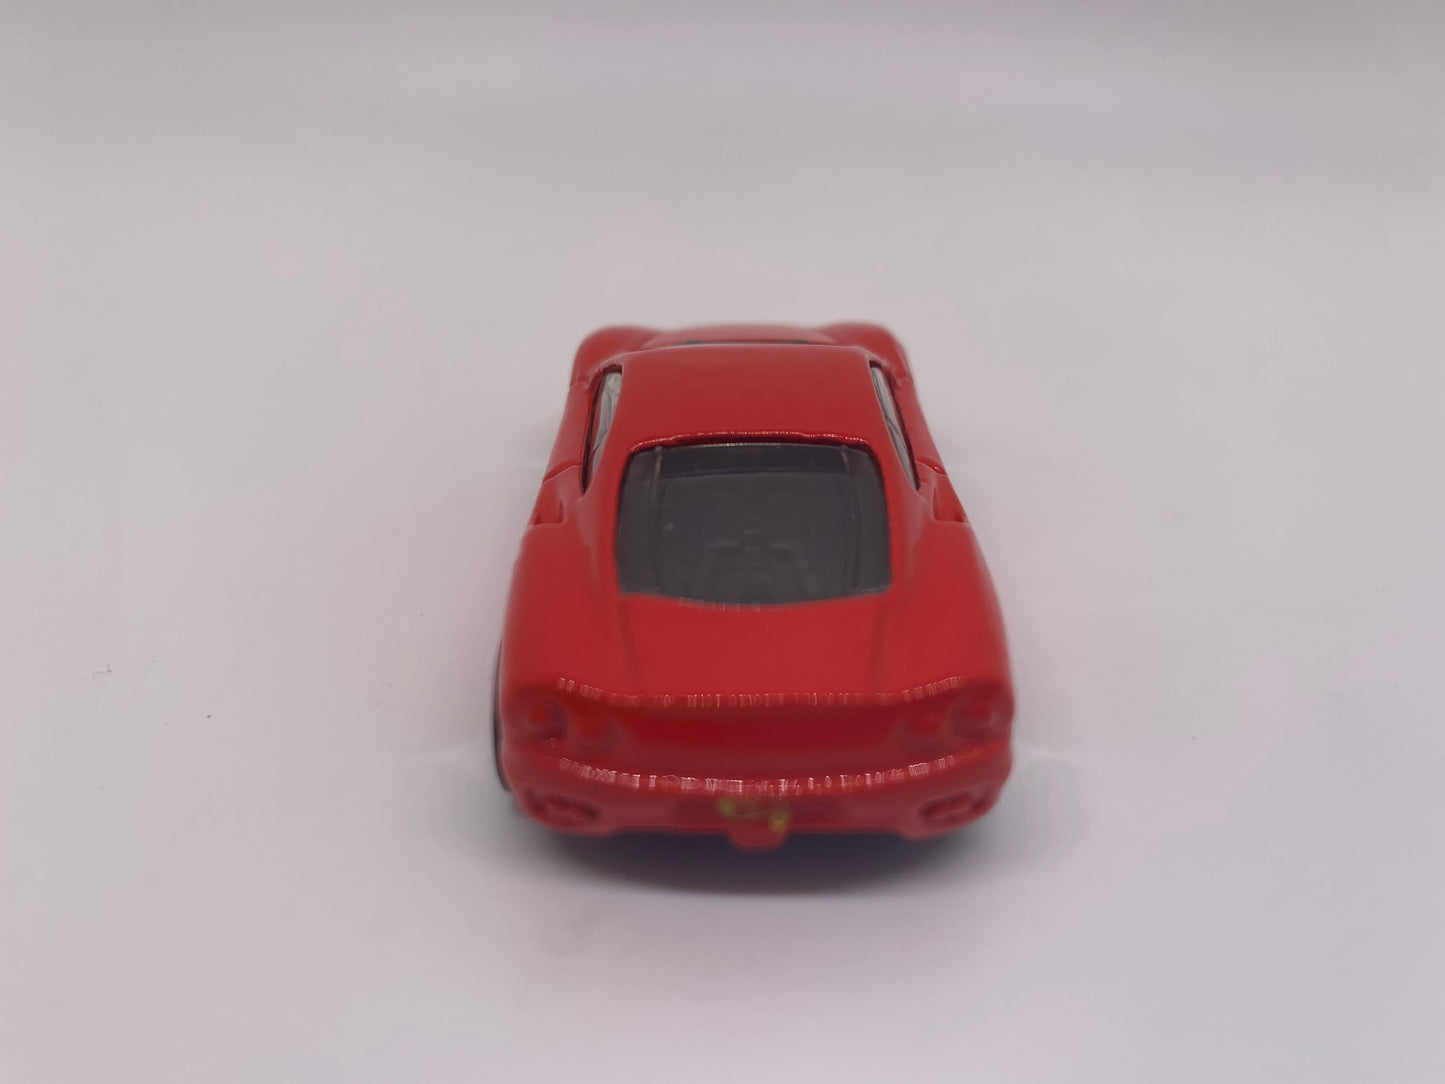 Hot Wheels Ferrari 360 Modena Red First Editions Perfect Birthday Gift Miniature Collectible Scale Model Toy Car